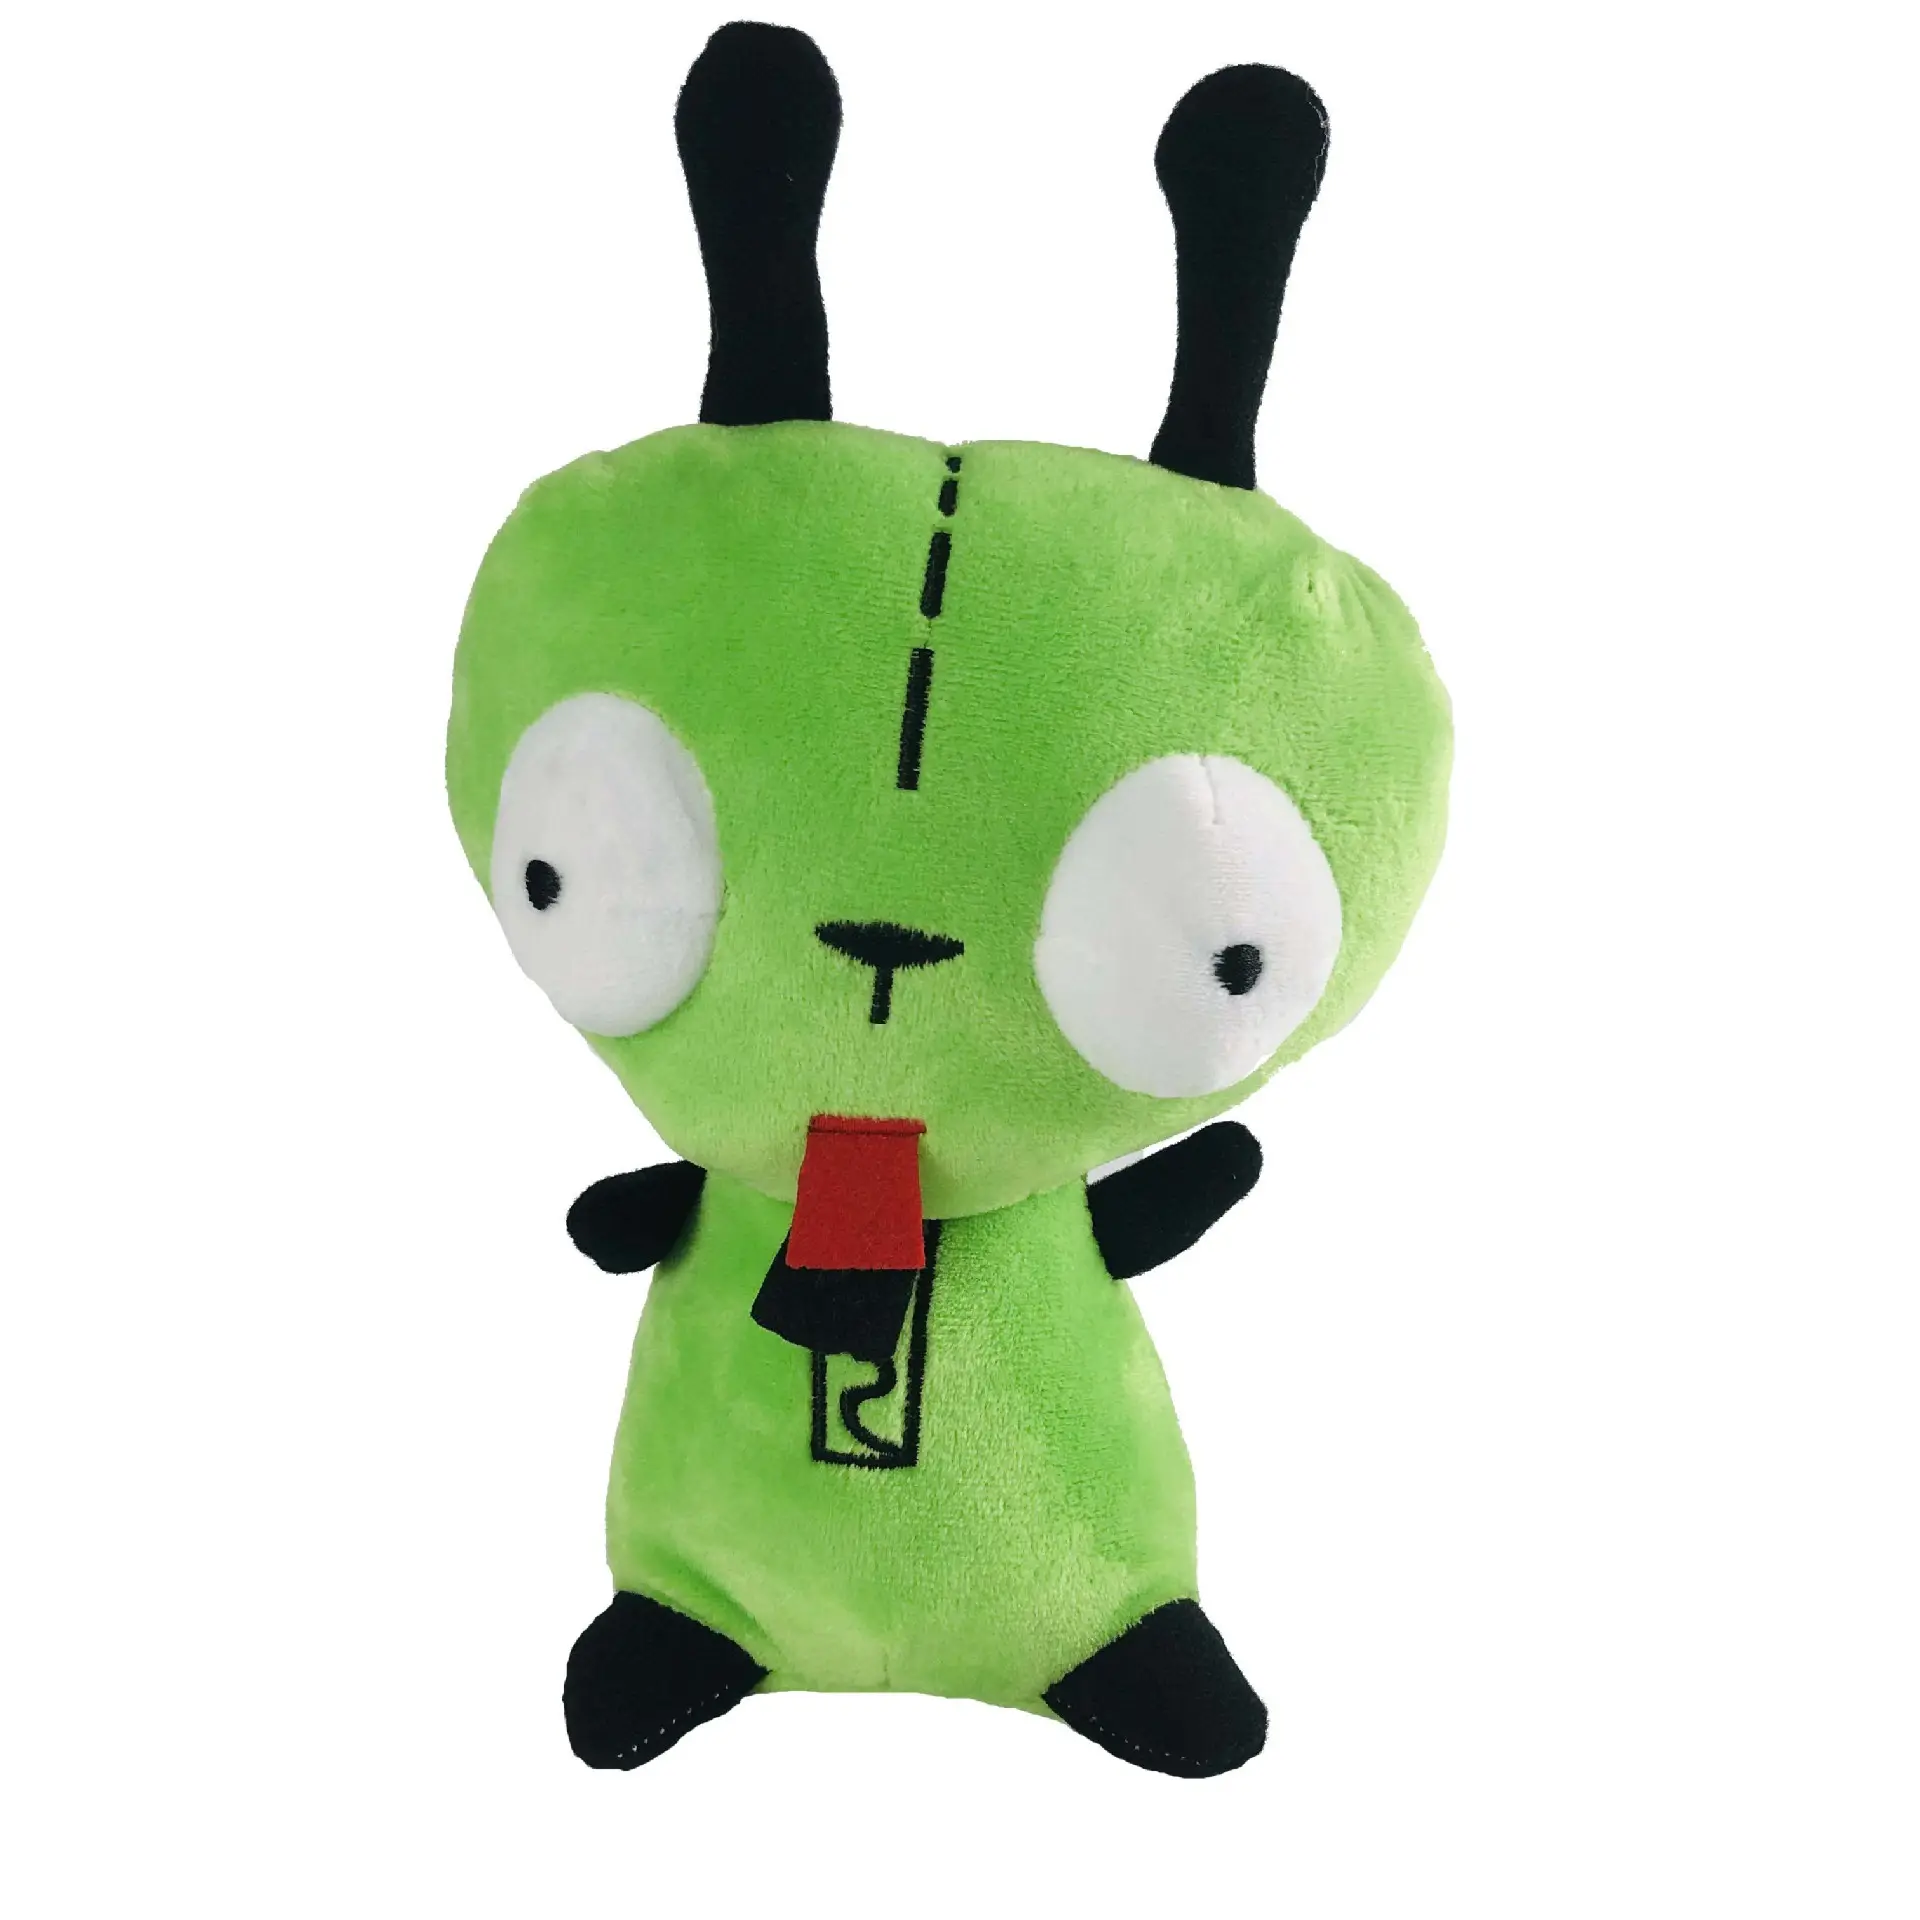 20cm Alien ET 3D Eyes Green Invader ZIM GIR Dog Plush Figure Toy Soft Stuffed Collectible Toy Christmas Gift Toys for Children